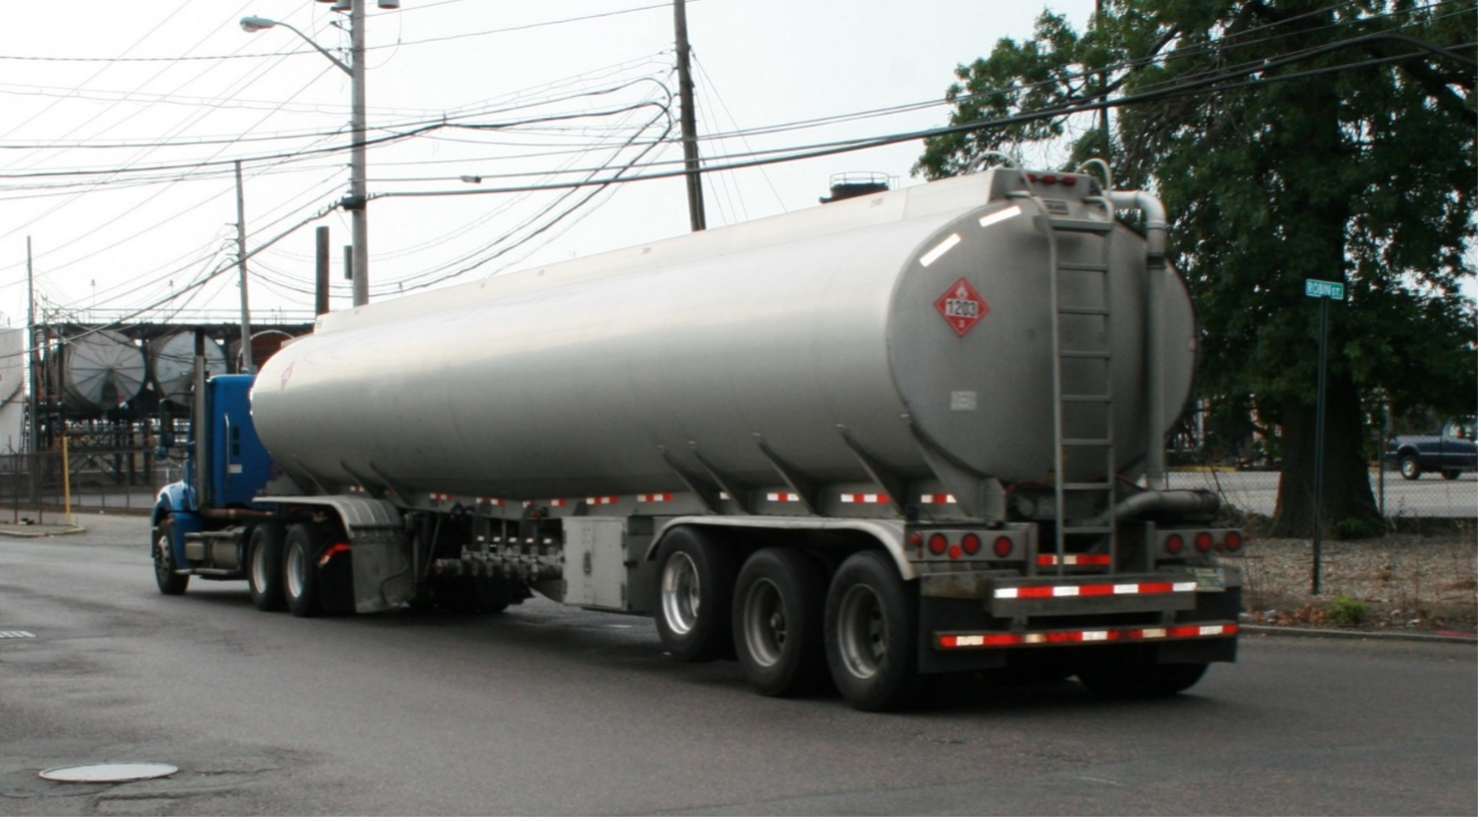 This figure shows two images of semi-trailers with hazardous cargoes. The first carries gasoline and the second carries liquefied natural gas. 1 of 2.